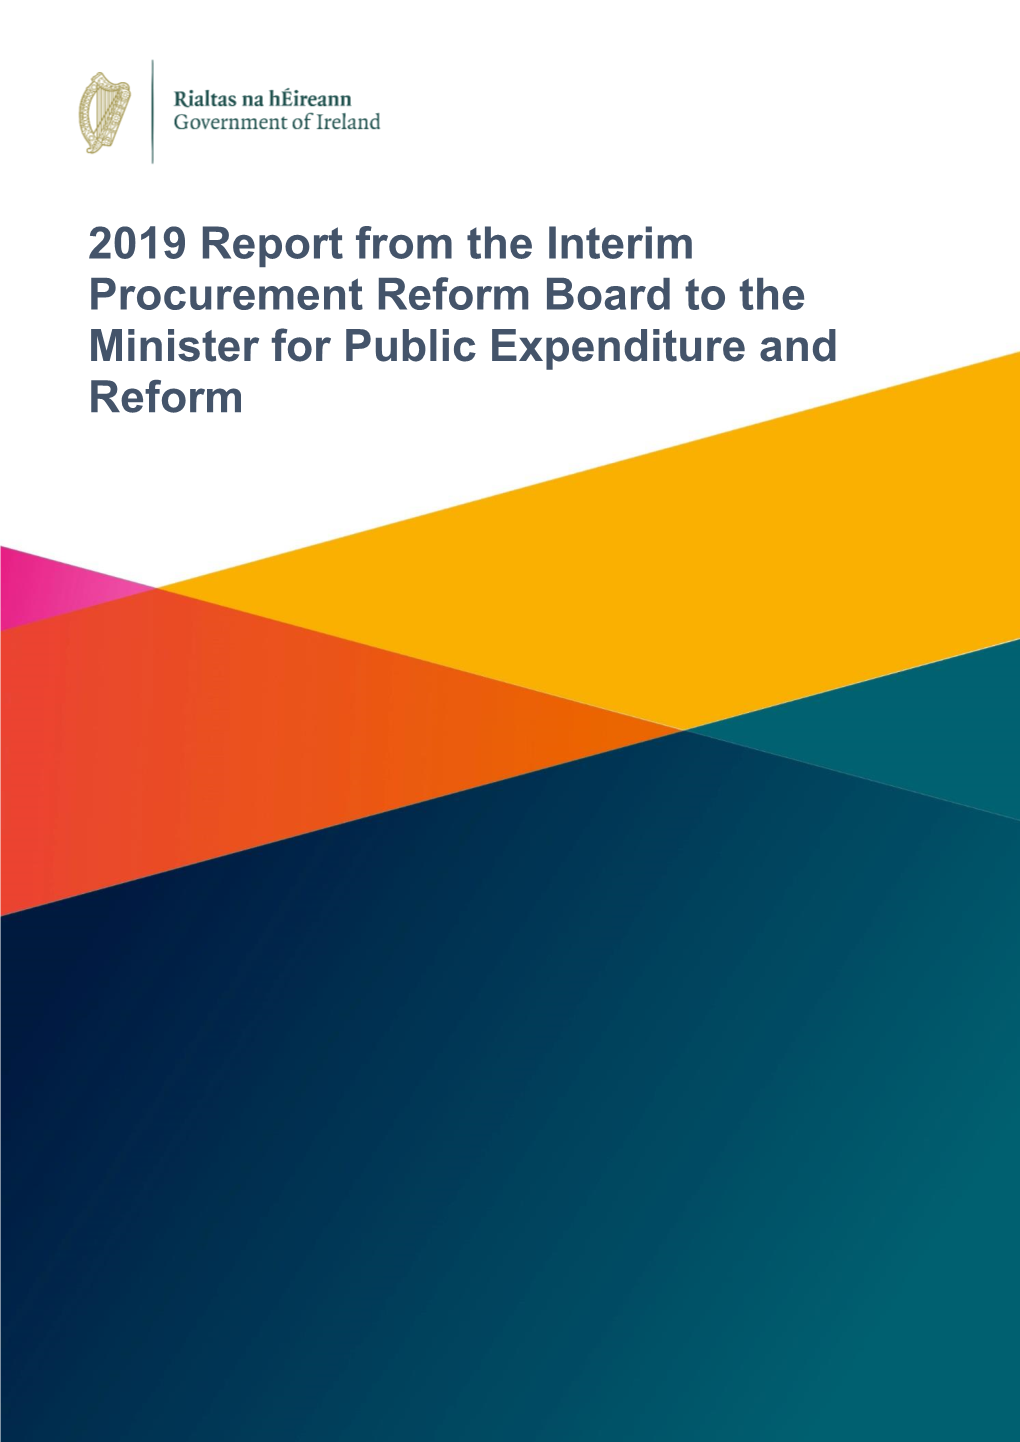 2019 Report from the Interim Procurement Reform Board to the Minister for Public Expenditure and Reform